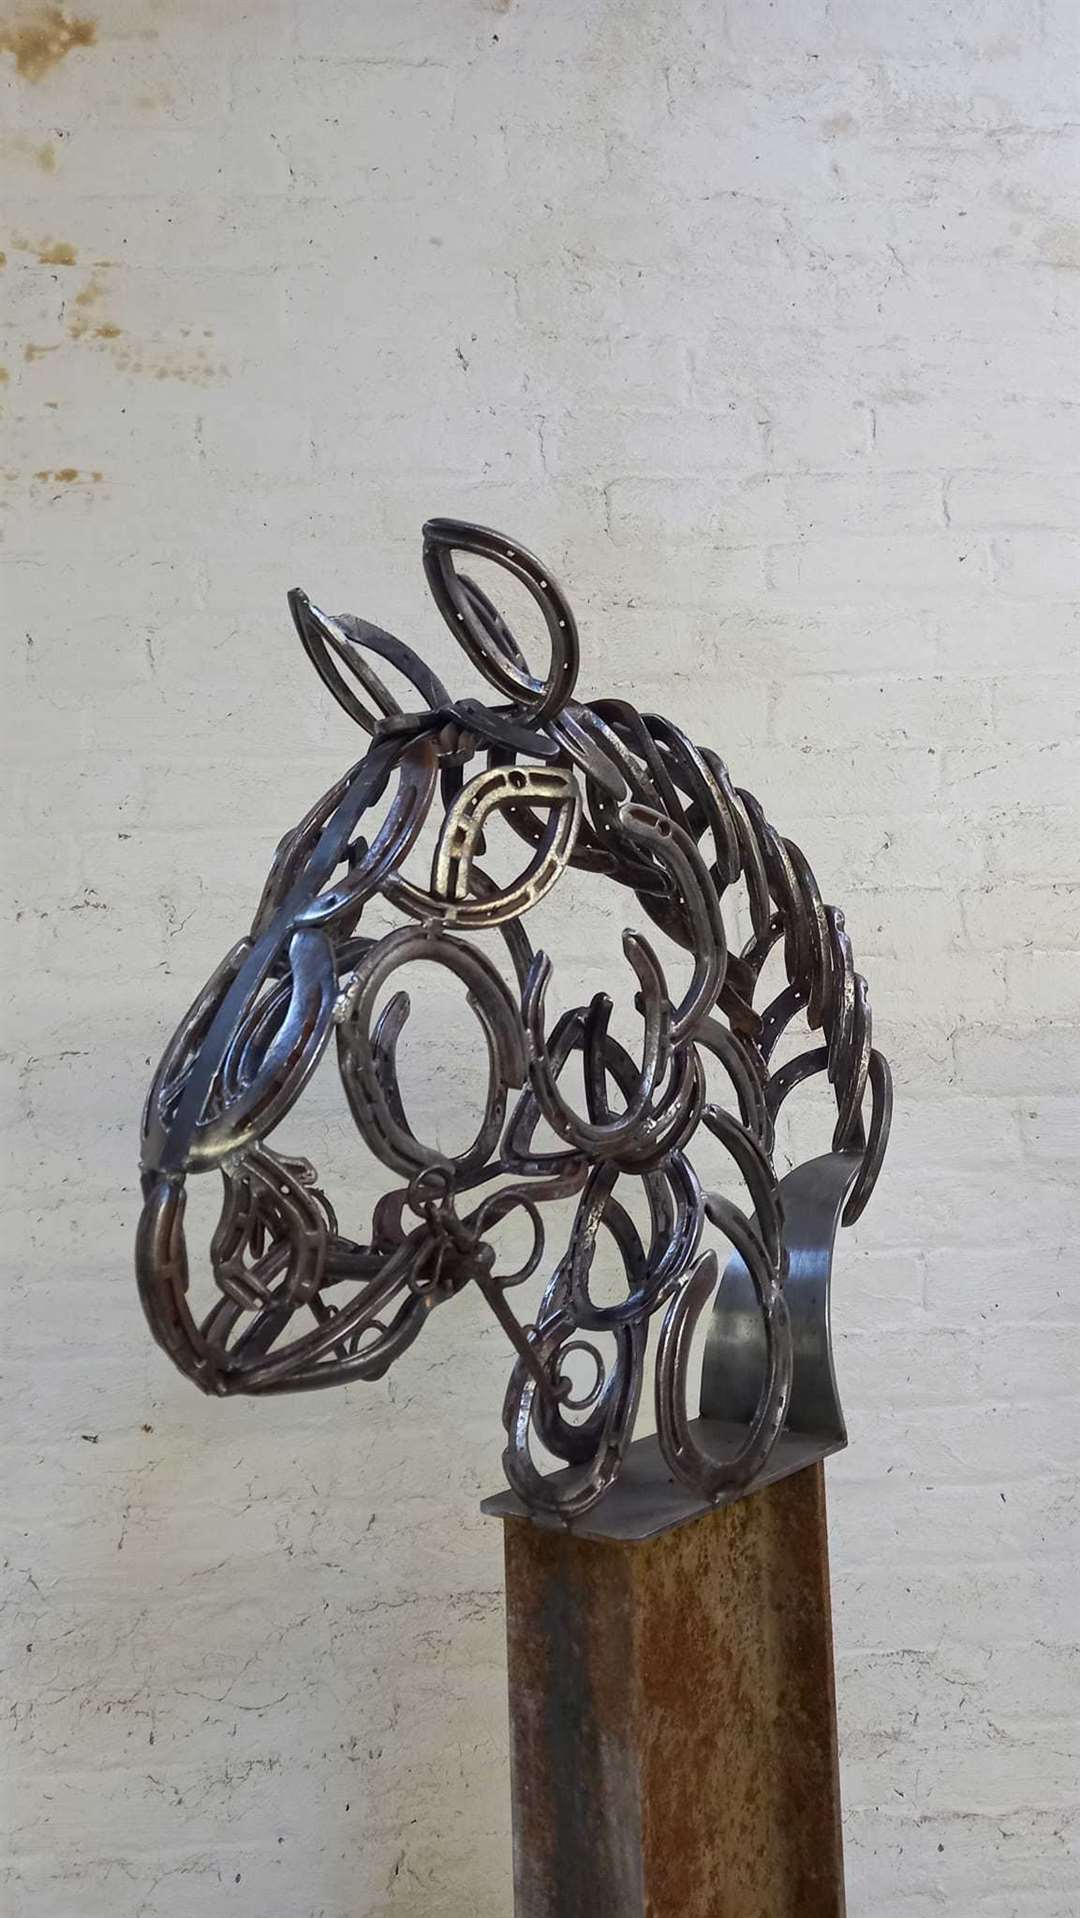 Some of the sculptures from Barwood Metalcraft. Picture: Stephen Barwood